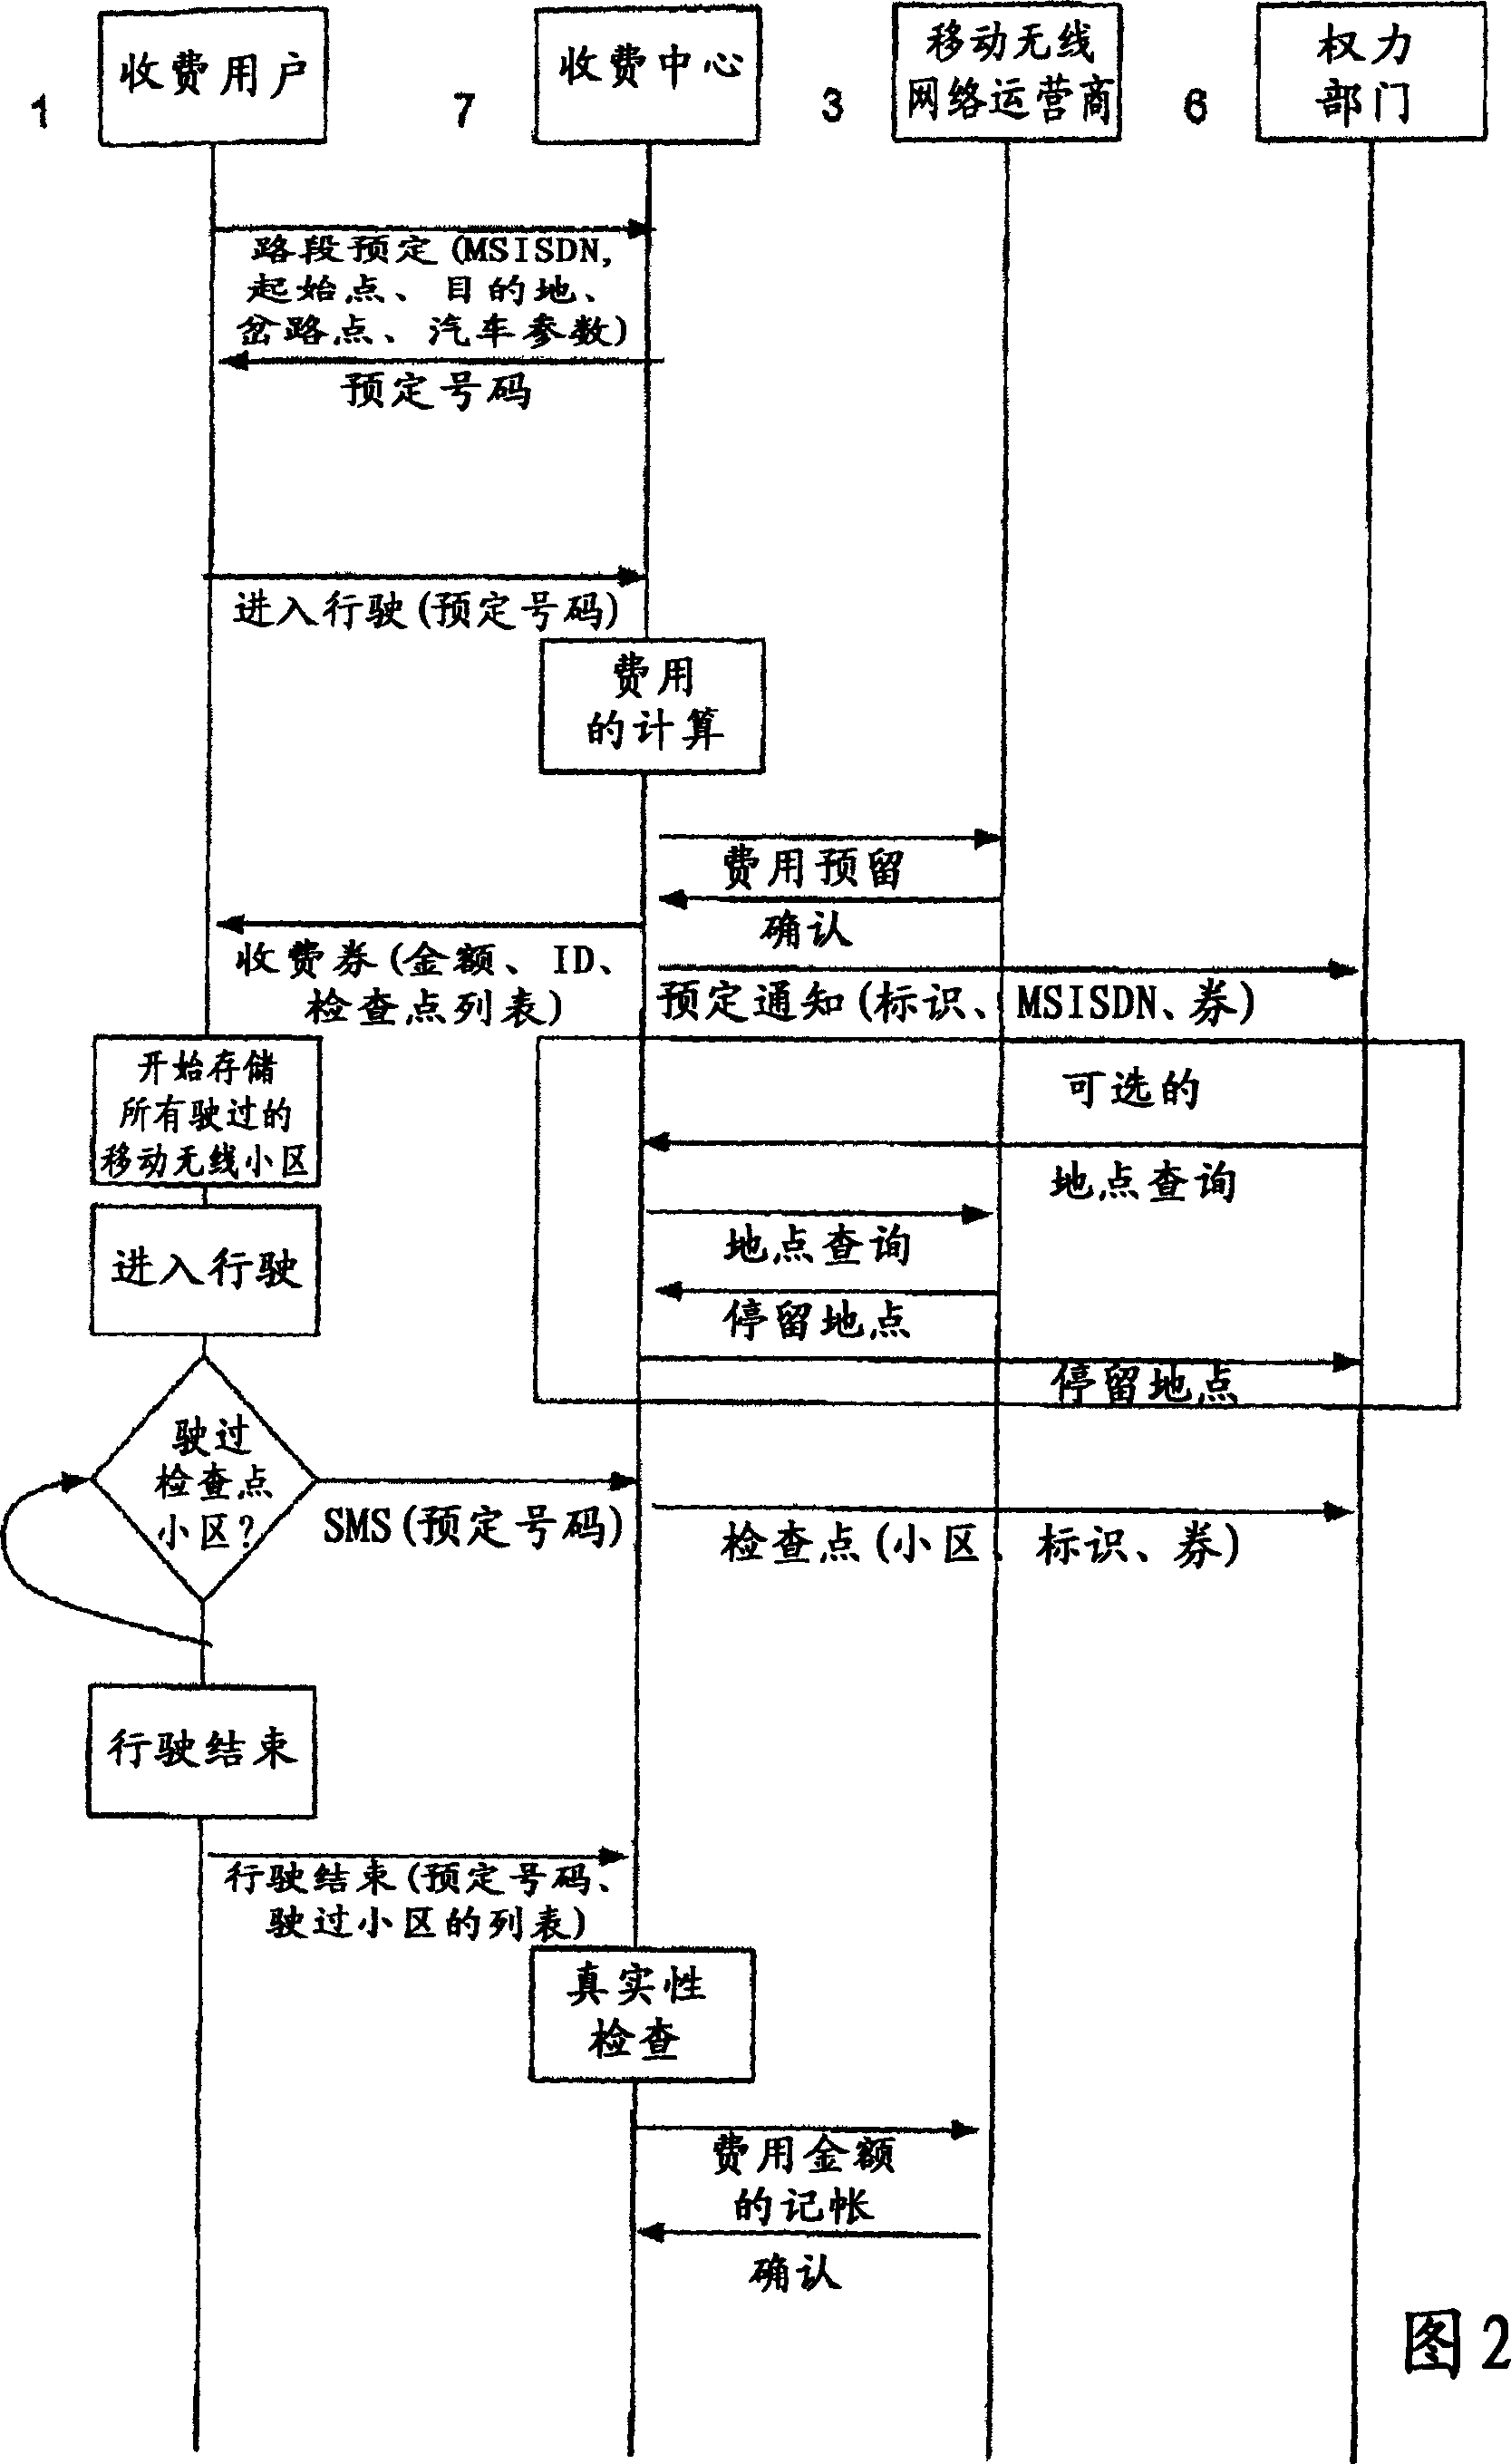 Electronic toll system for traffic routes, and method for the operation thereof